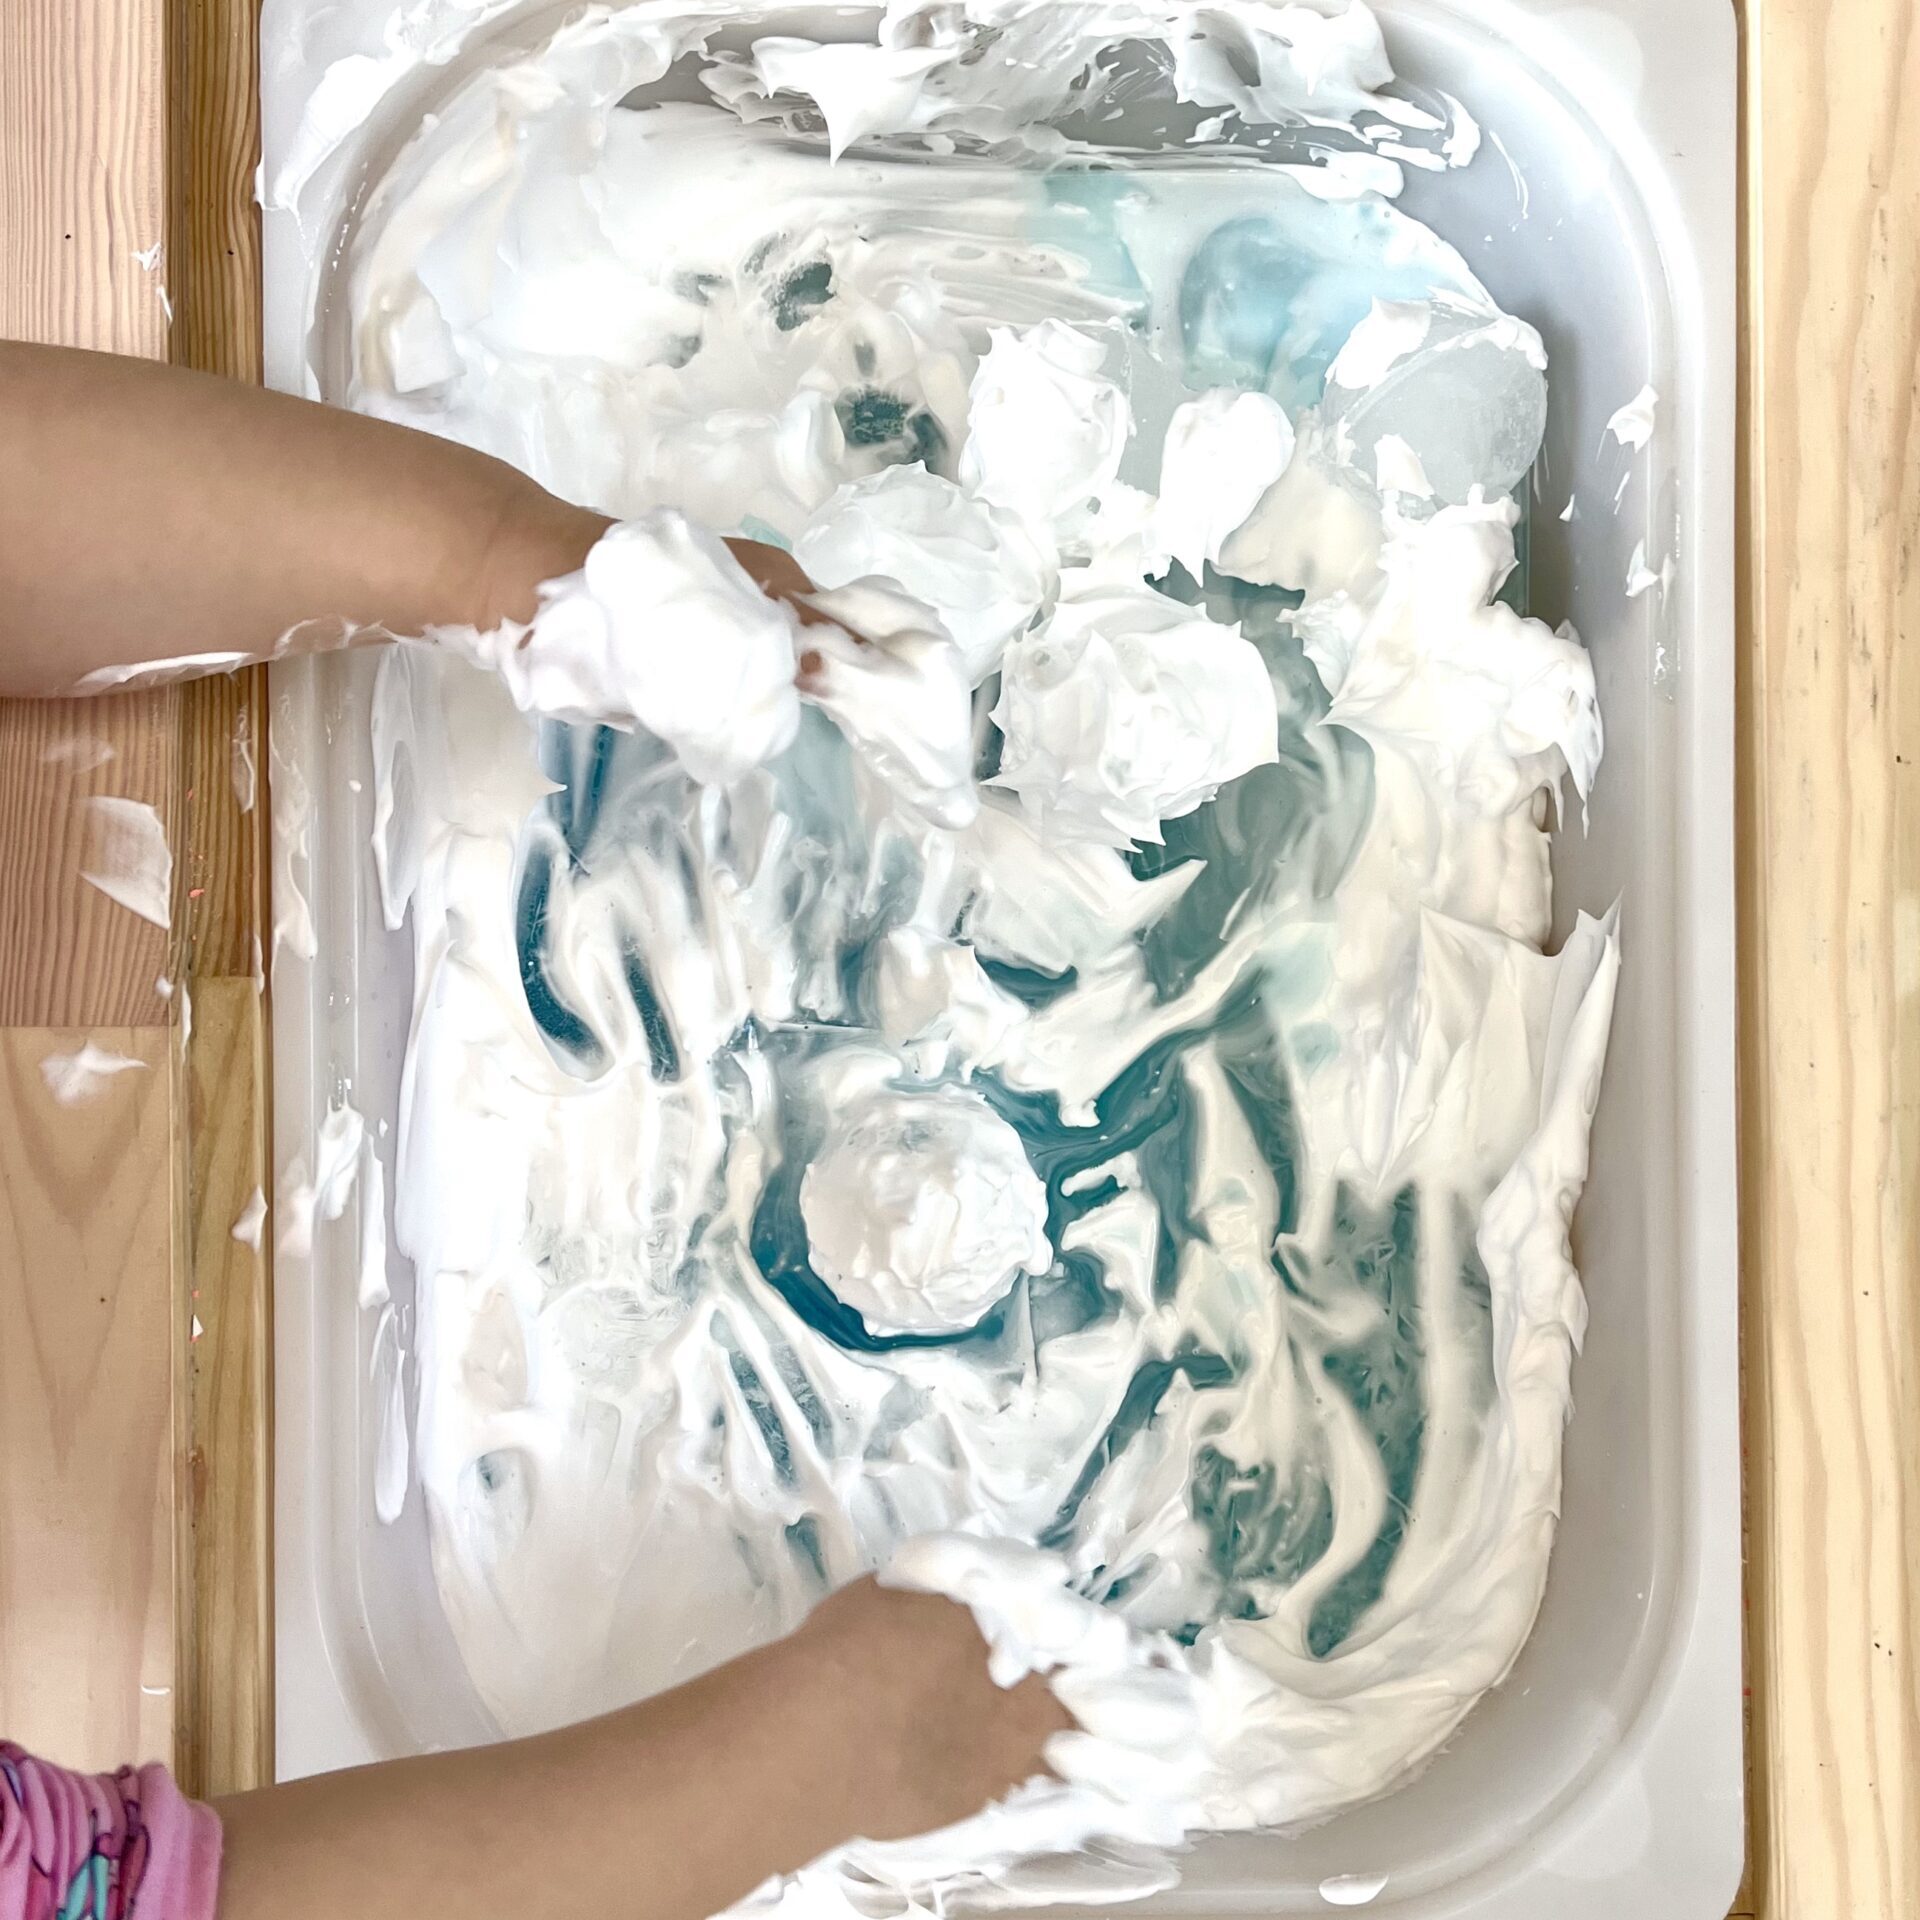 Tiny Messy Hands Playing With Ice Balls in Sensory Bin FIlled With Frozen Blue Water and Shaving Cream